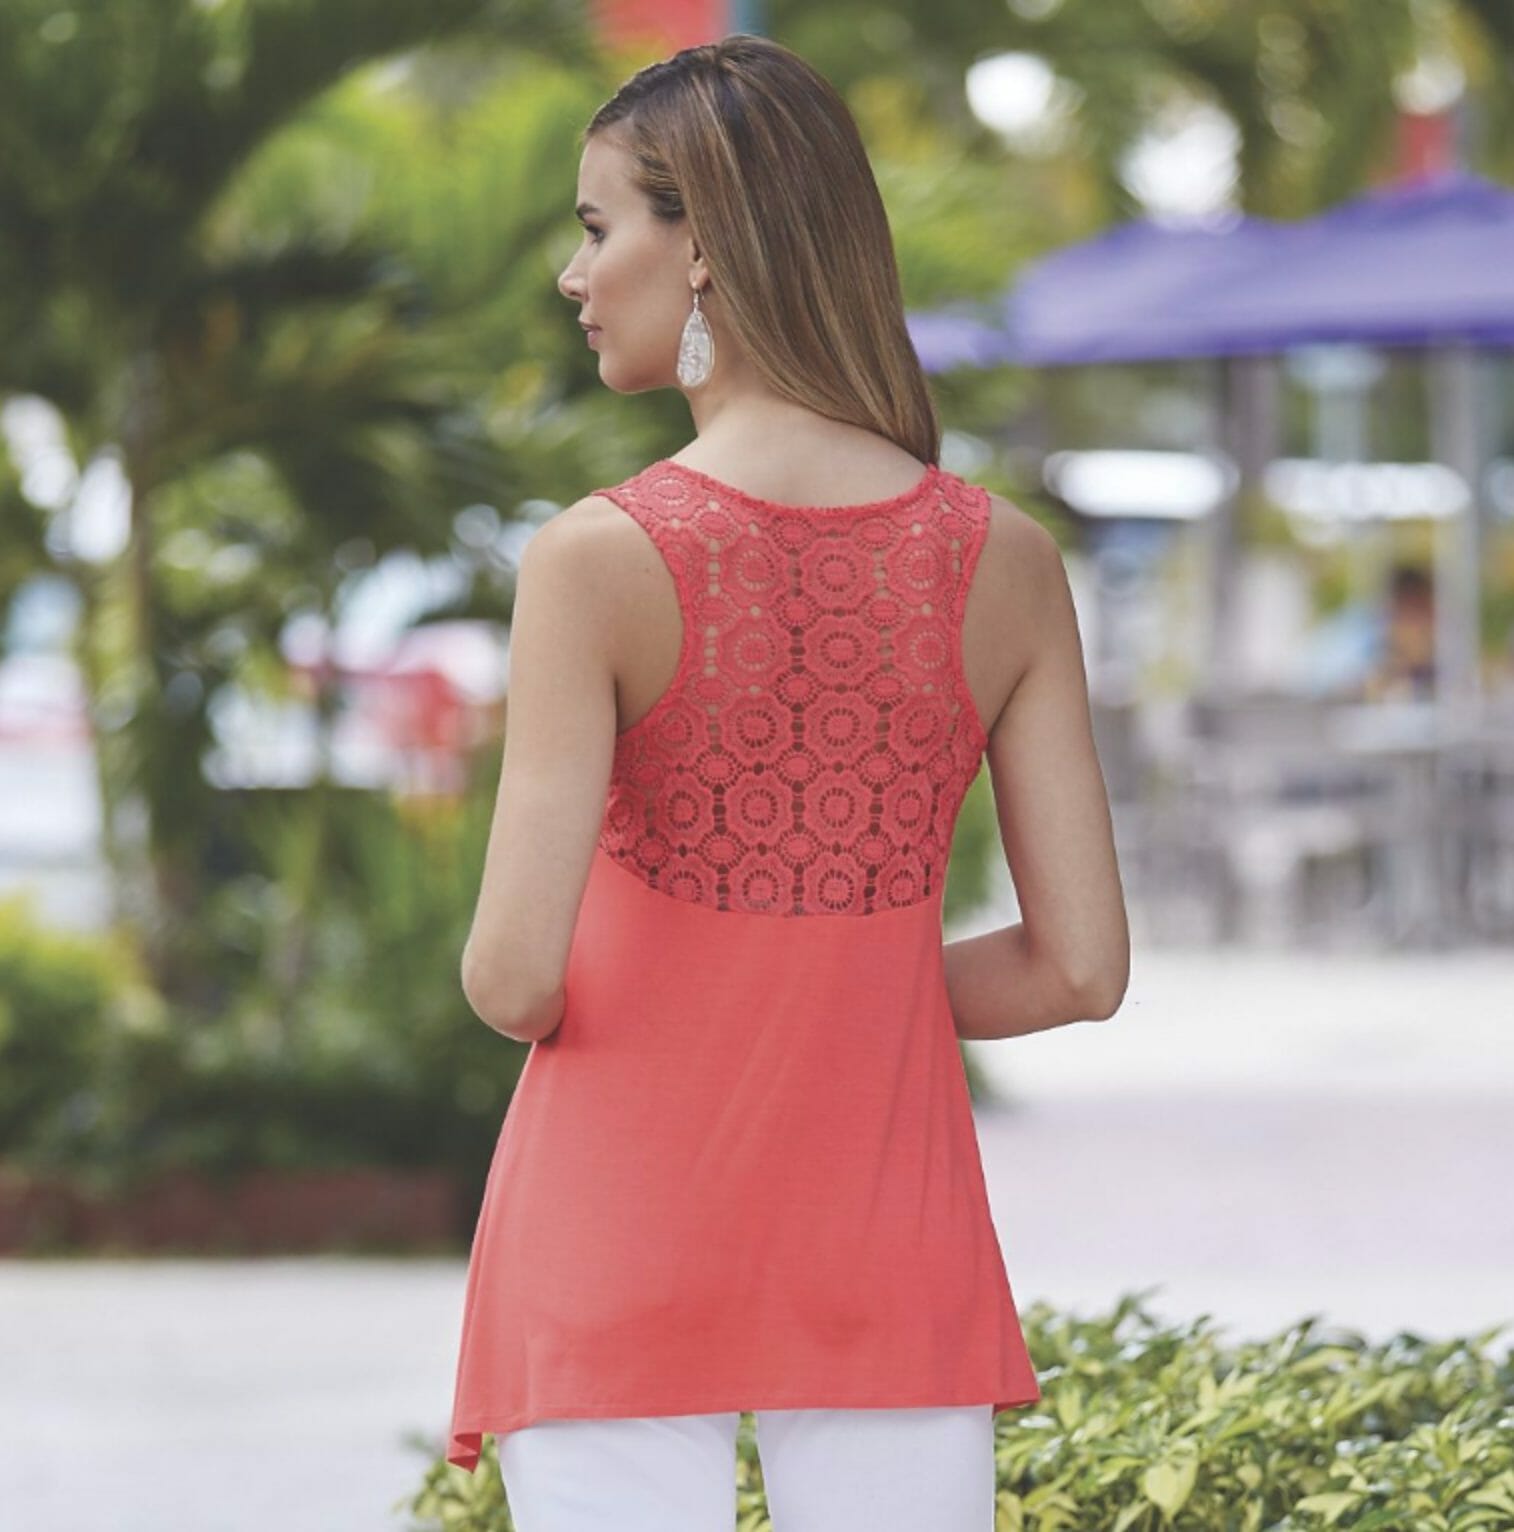 Back view of a woman outdoors, wearing a coral lace back sleeveless top, white drop earrings, and white pant.